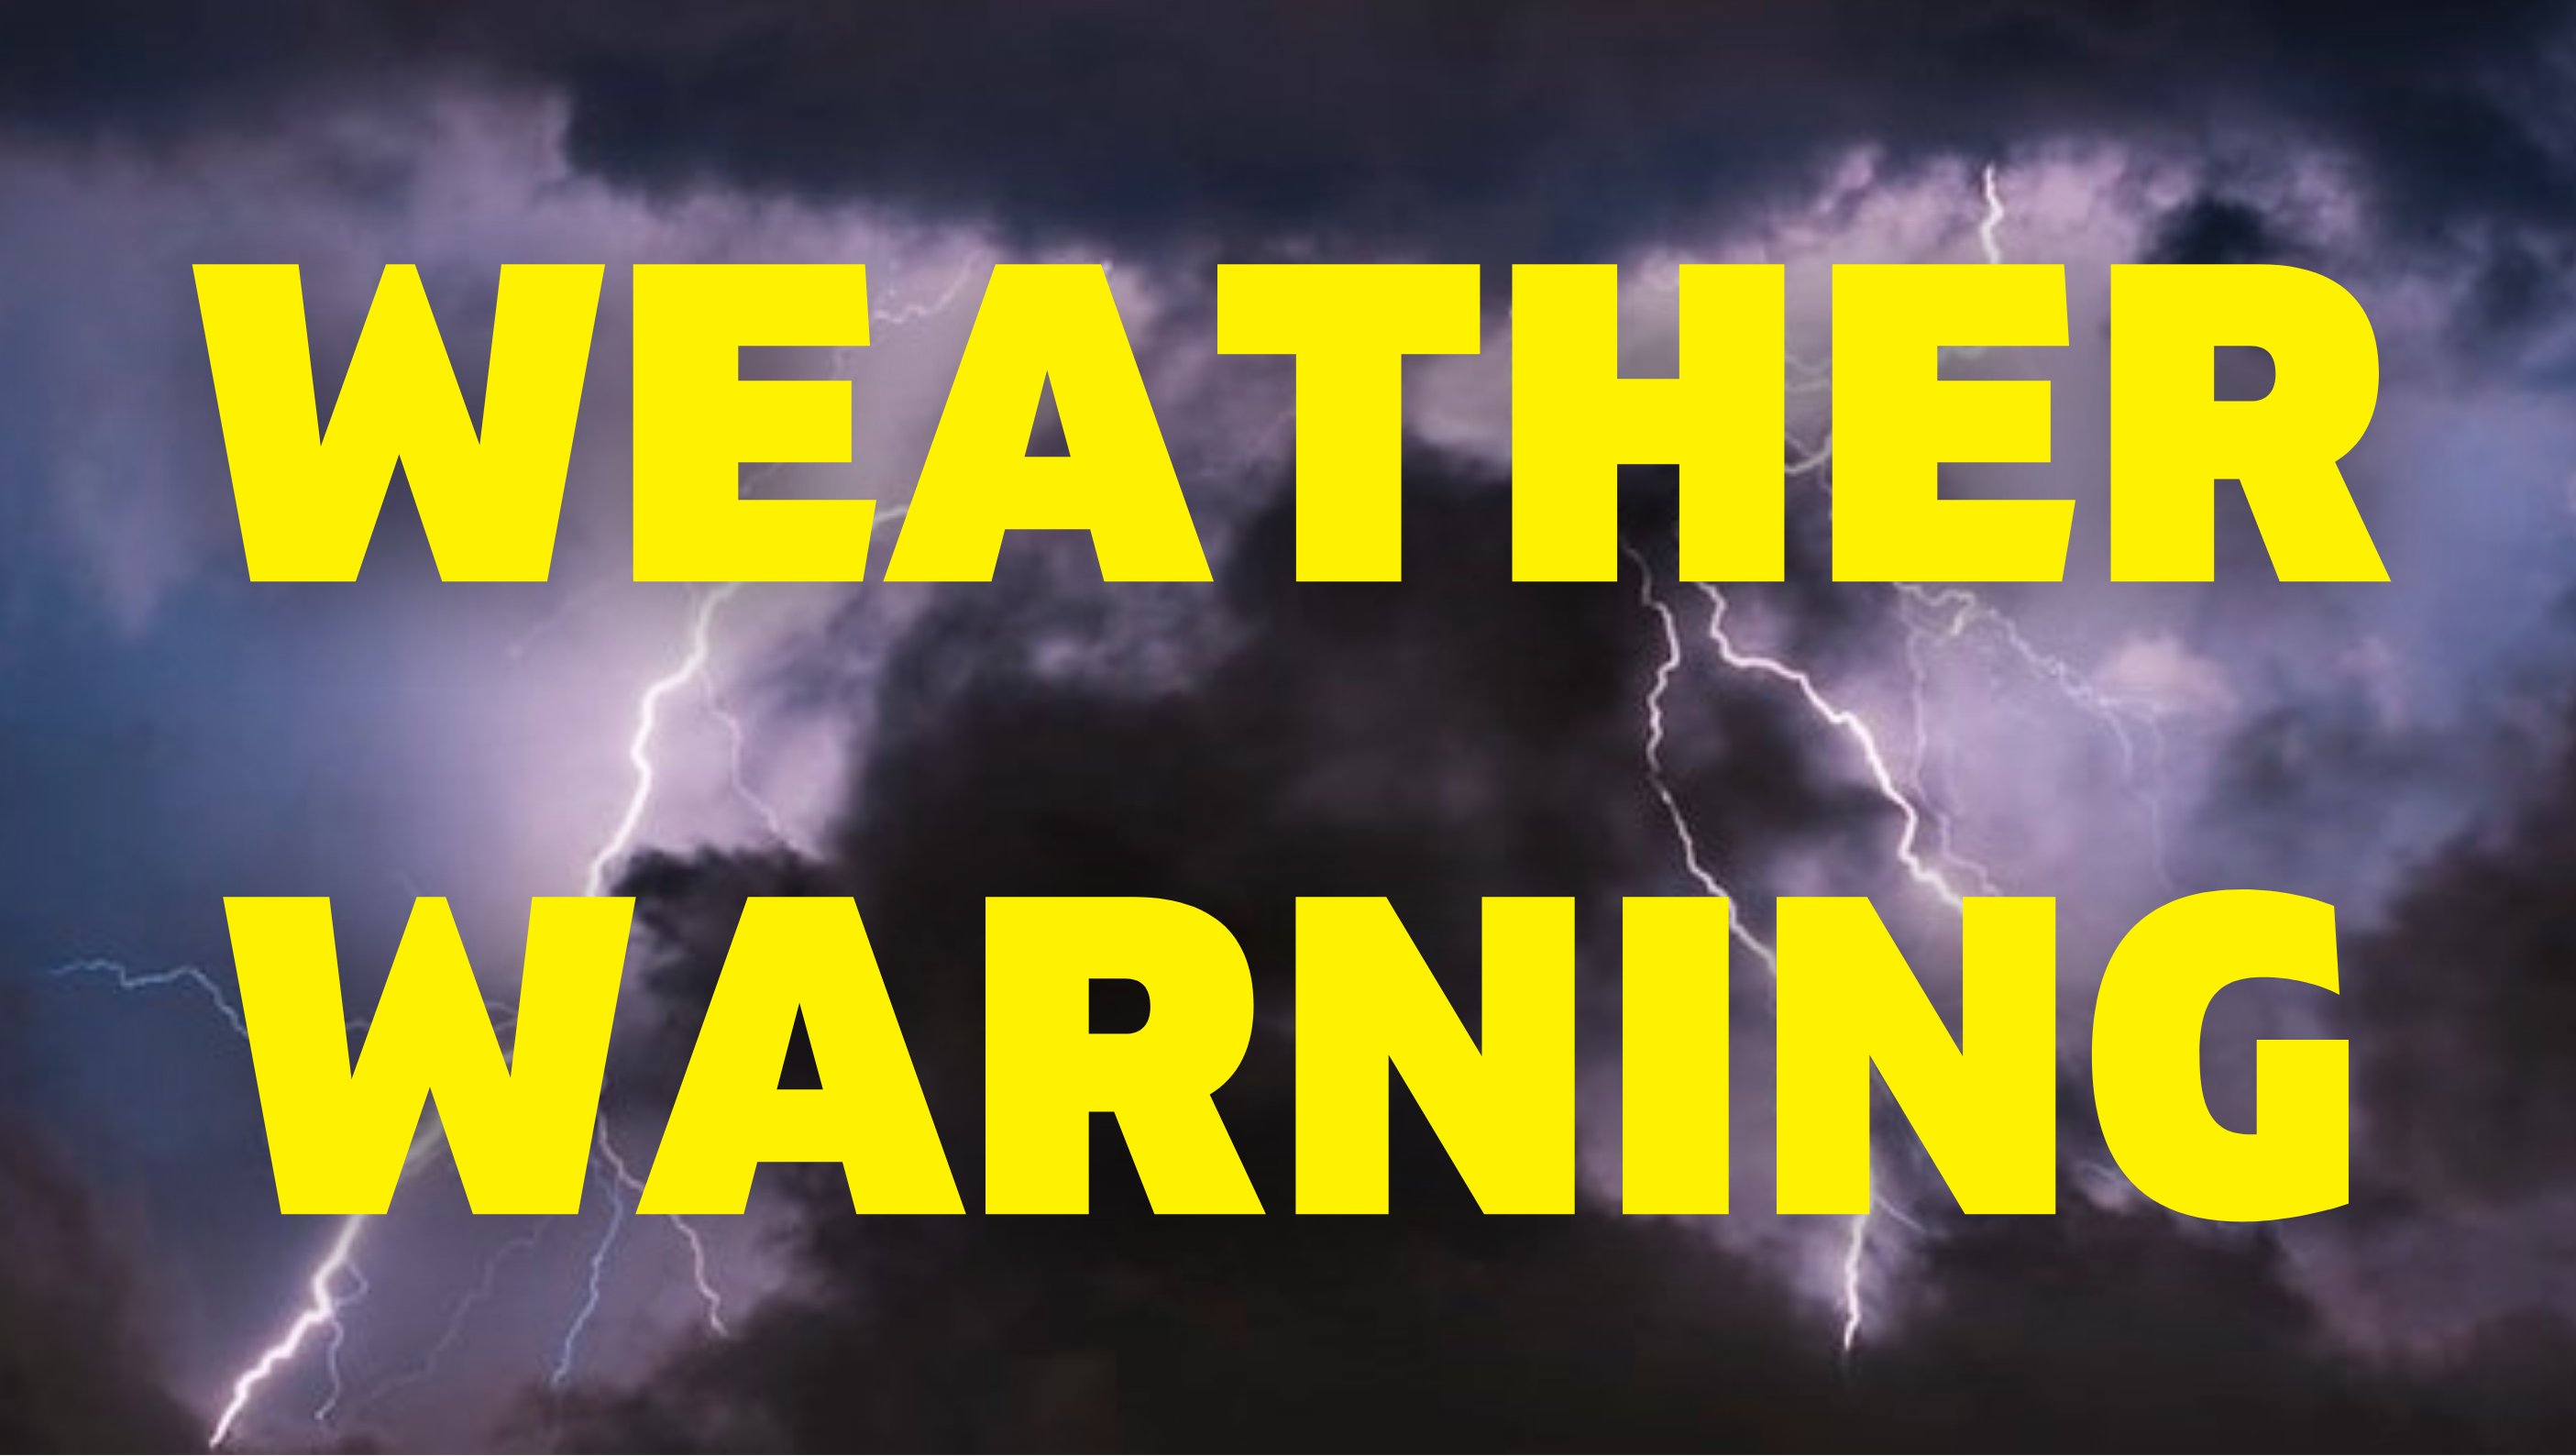 WEATHER WARNING | Met Office issues warning for intense rainfall across parts of Herefordshire on Tuesday